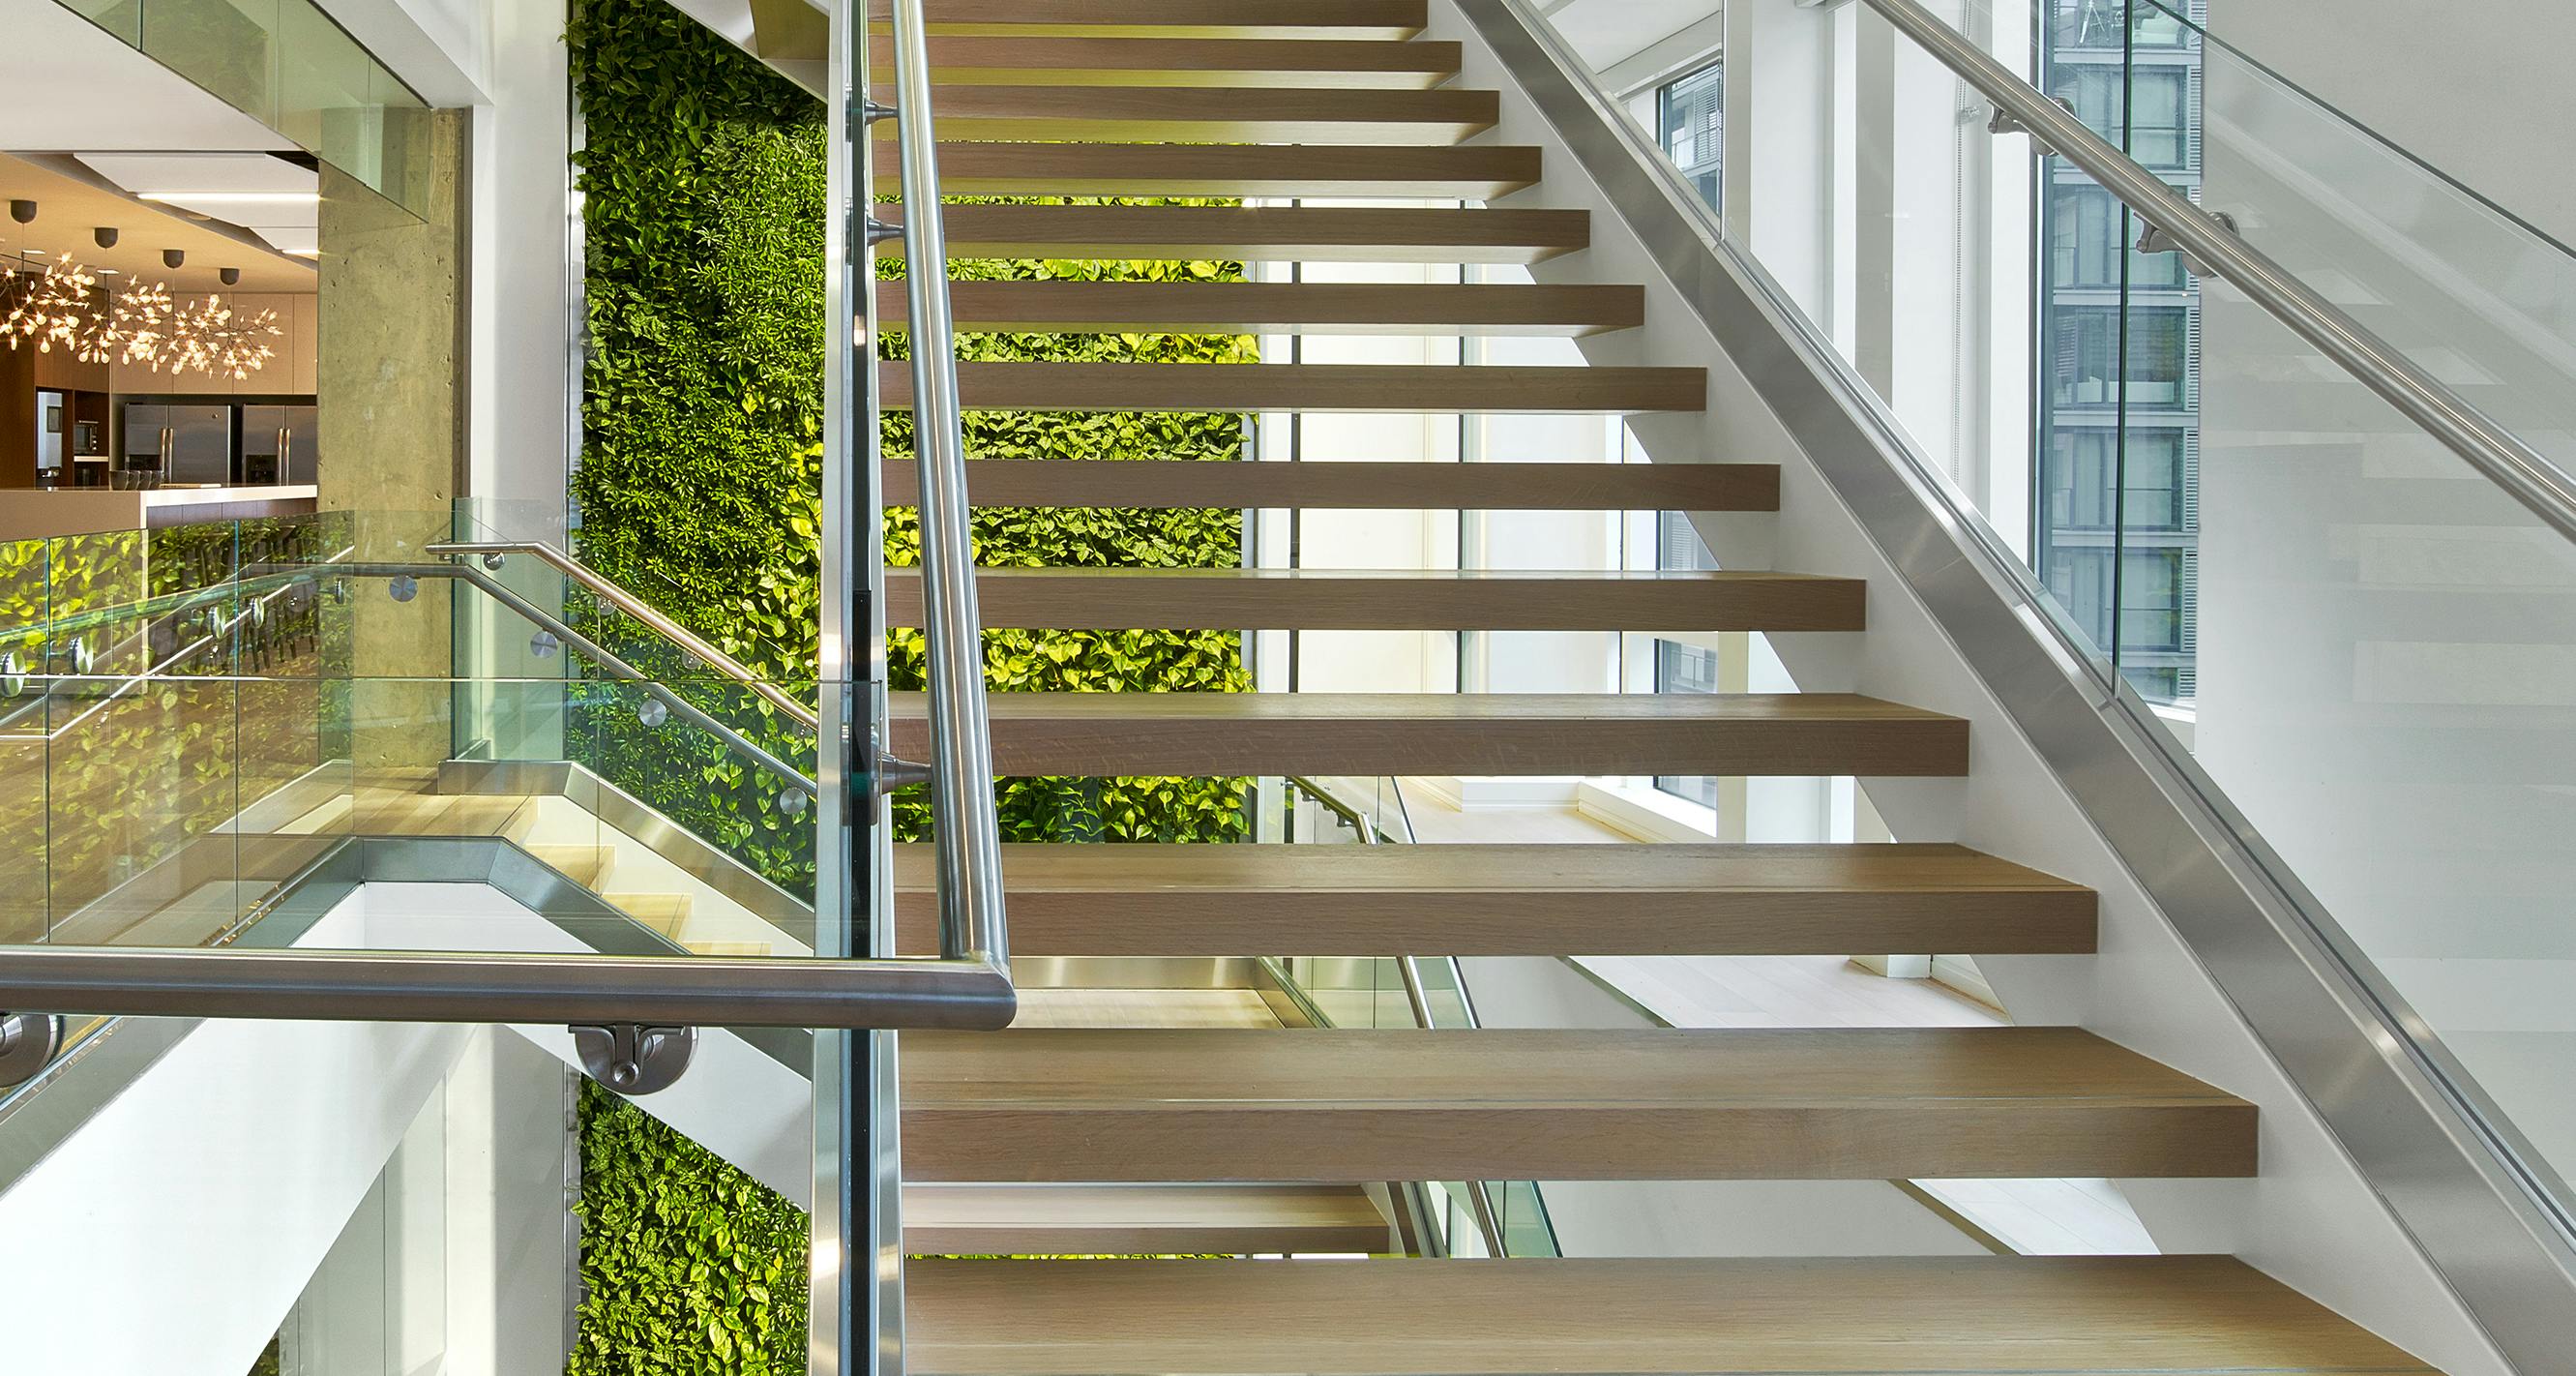 Staircase in Nixon Peabody's DC office, showing the “living wall,” a wall-mounted garden of various plants